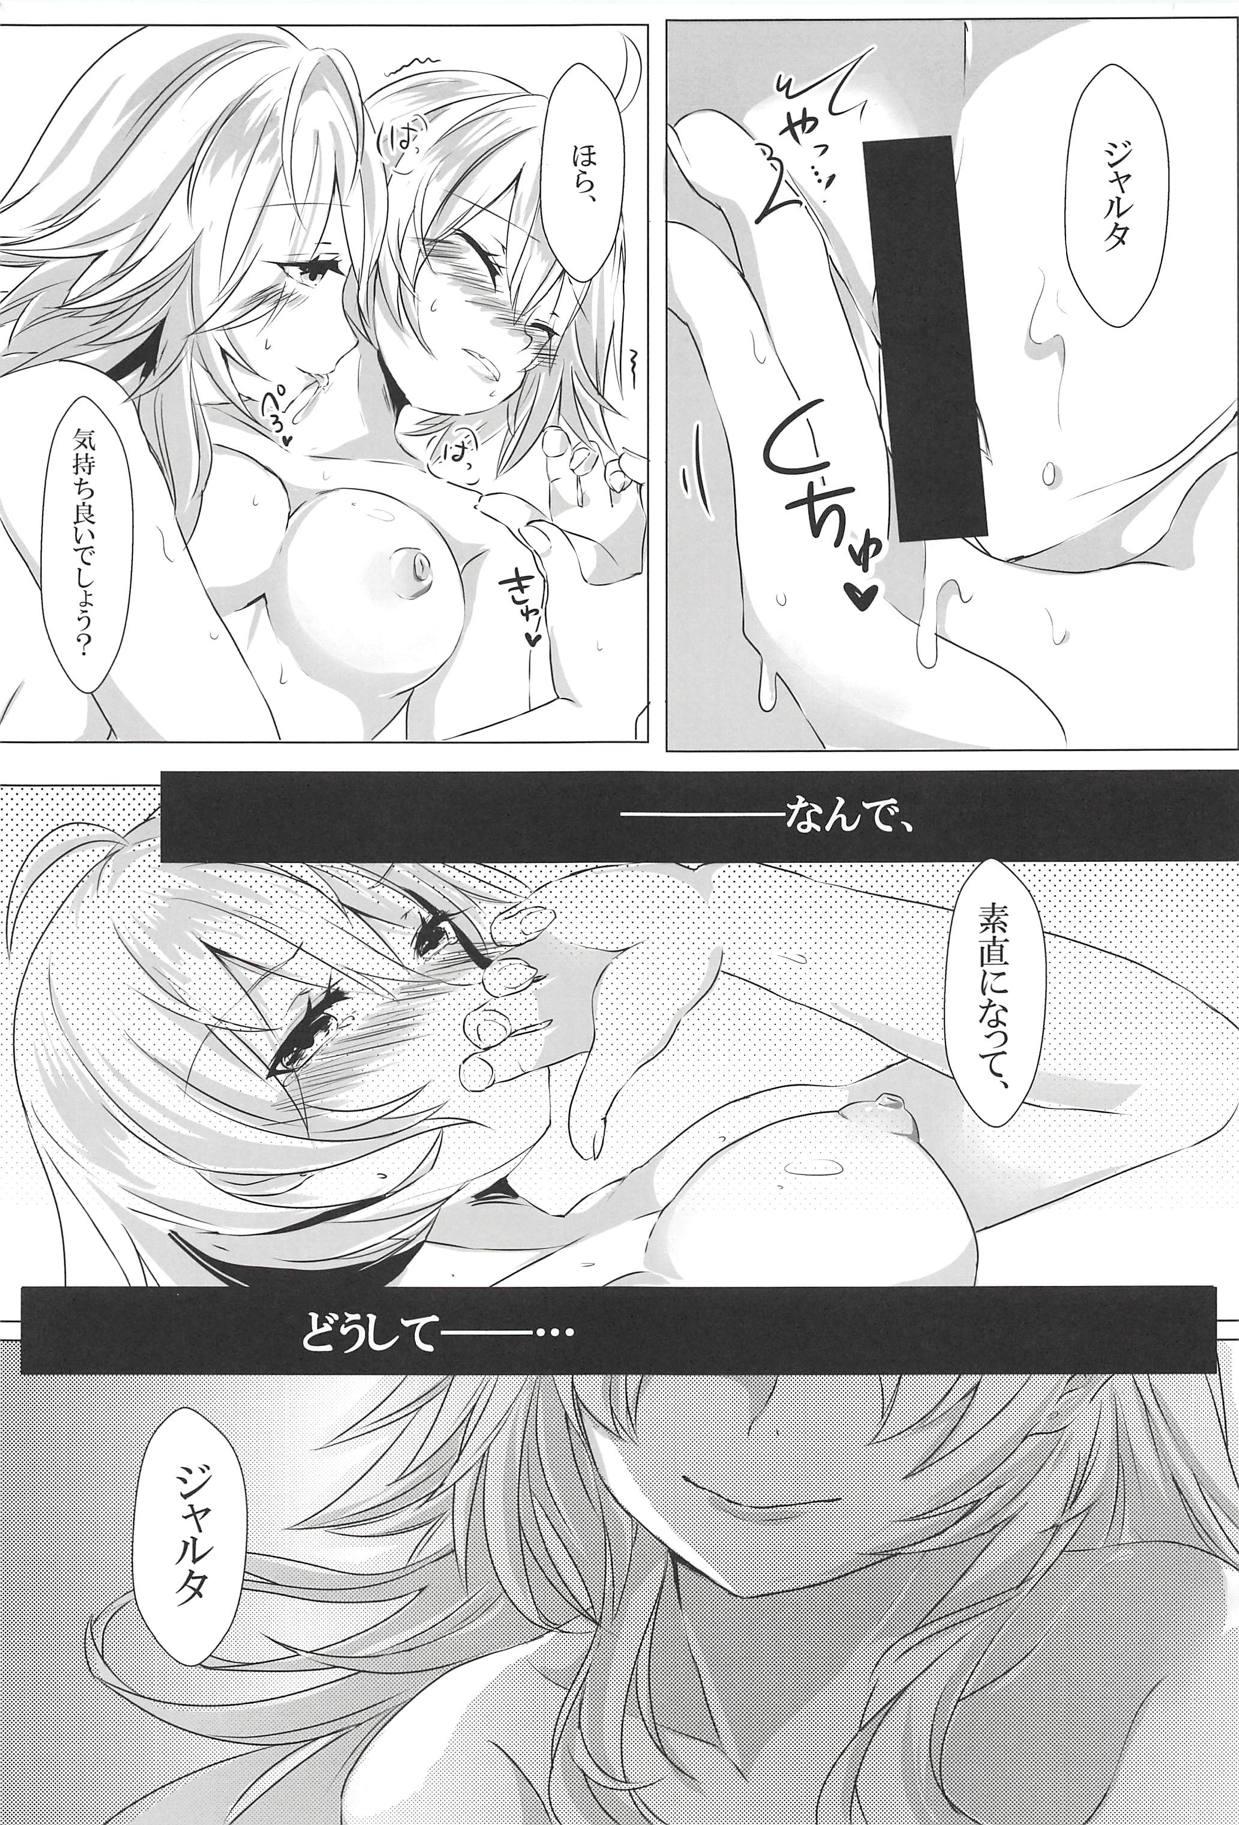 Cream TWIN SCANDAL - Fate grand order Amatuer - Page 6